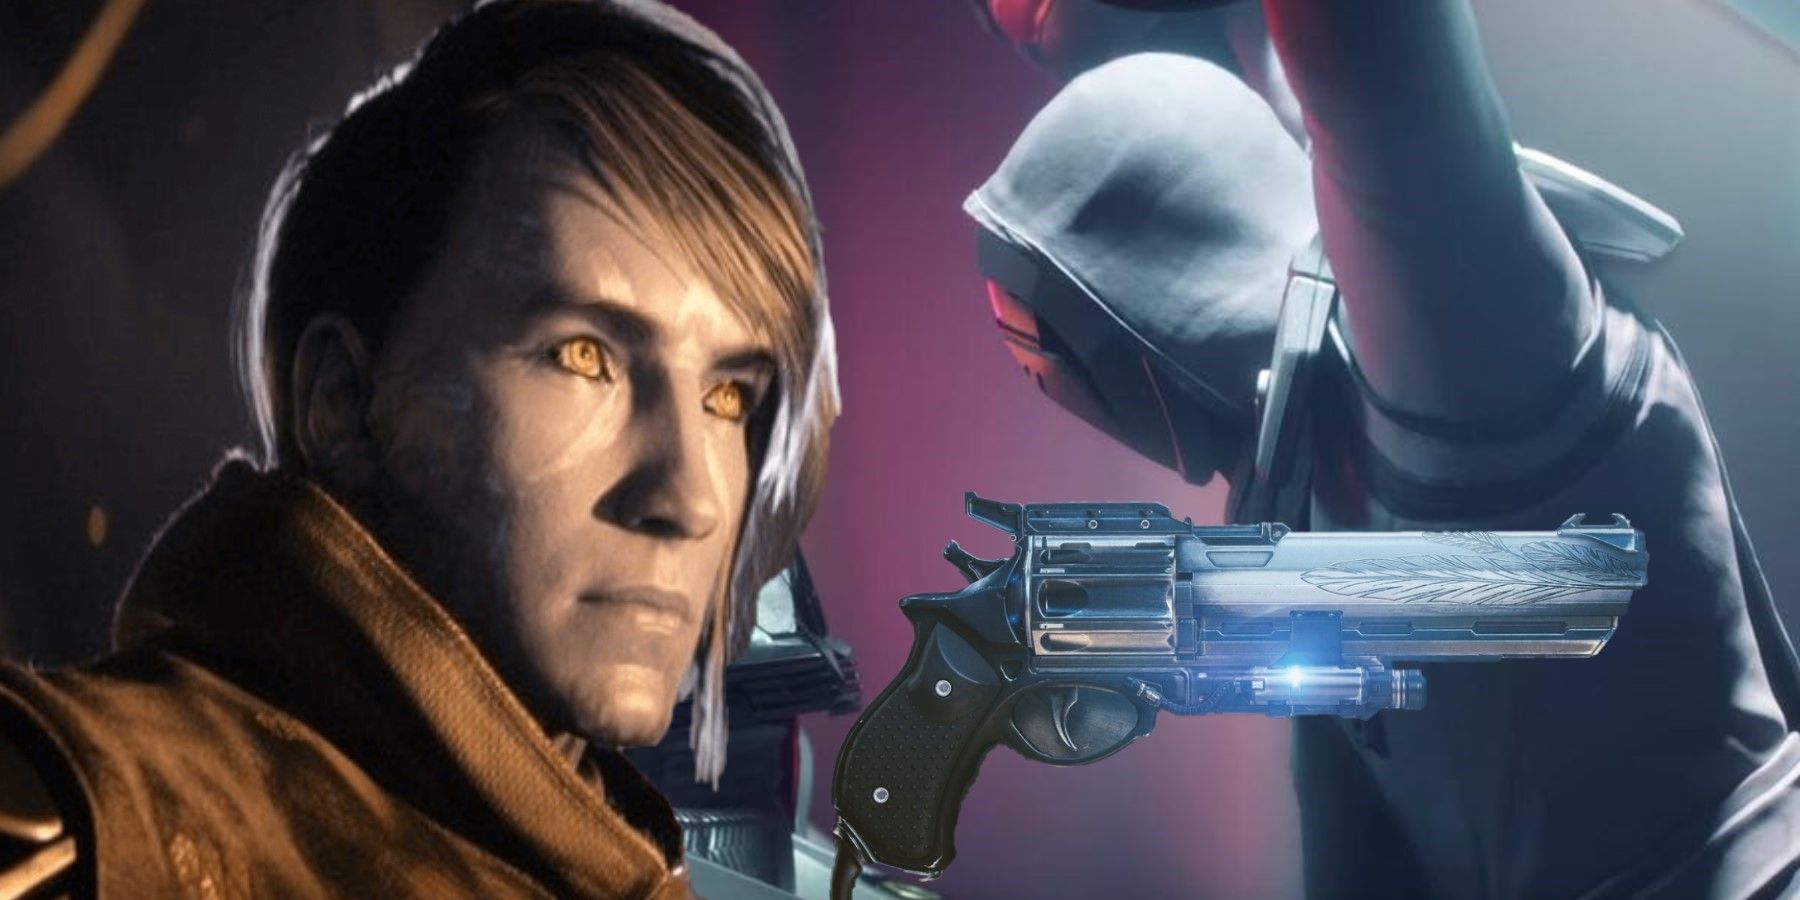 Destiny 2: Crow Could Become the Hunter Vanguard or Take the Role of Speaker